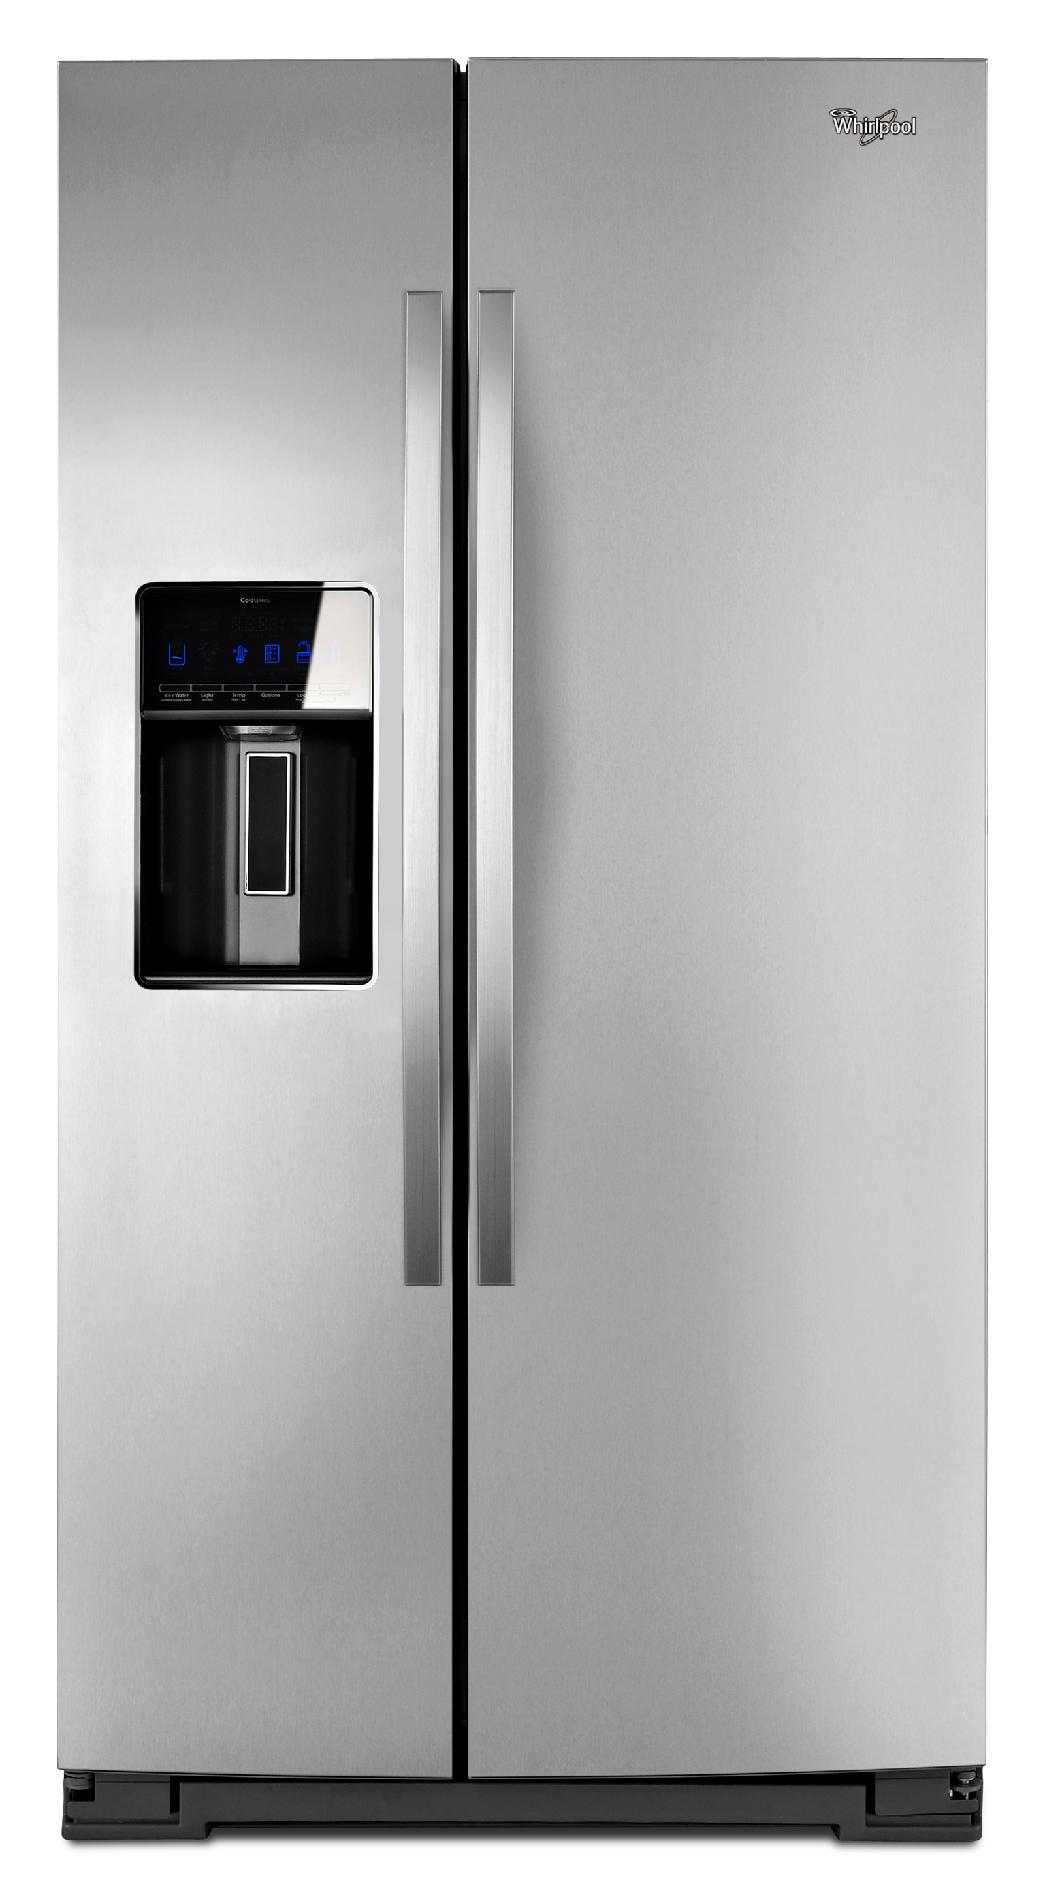 Whirlpool 29.7 cu. ft. Side-by-Side Refrigerator w/ MicroEdge Shelves - Stainless Steel